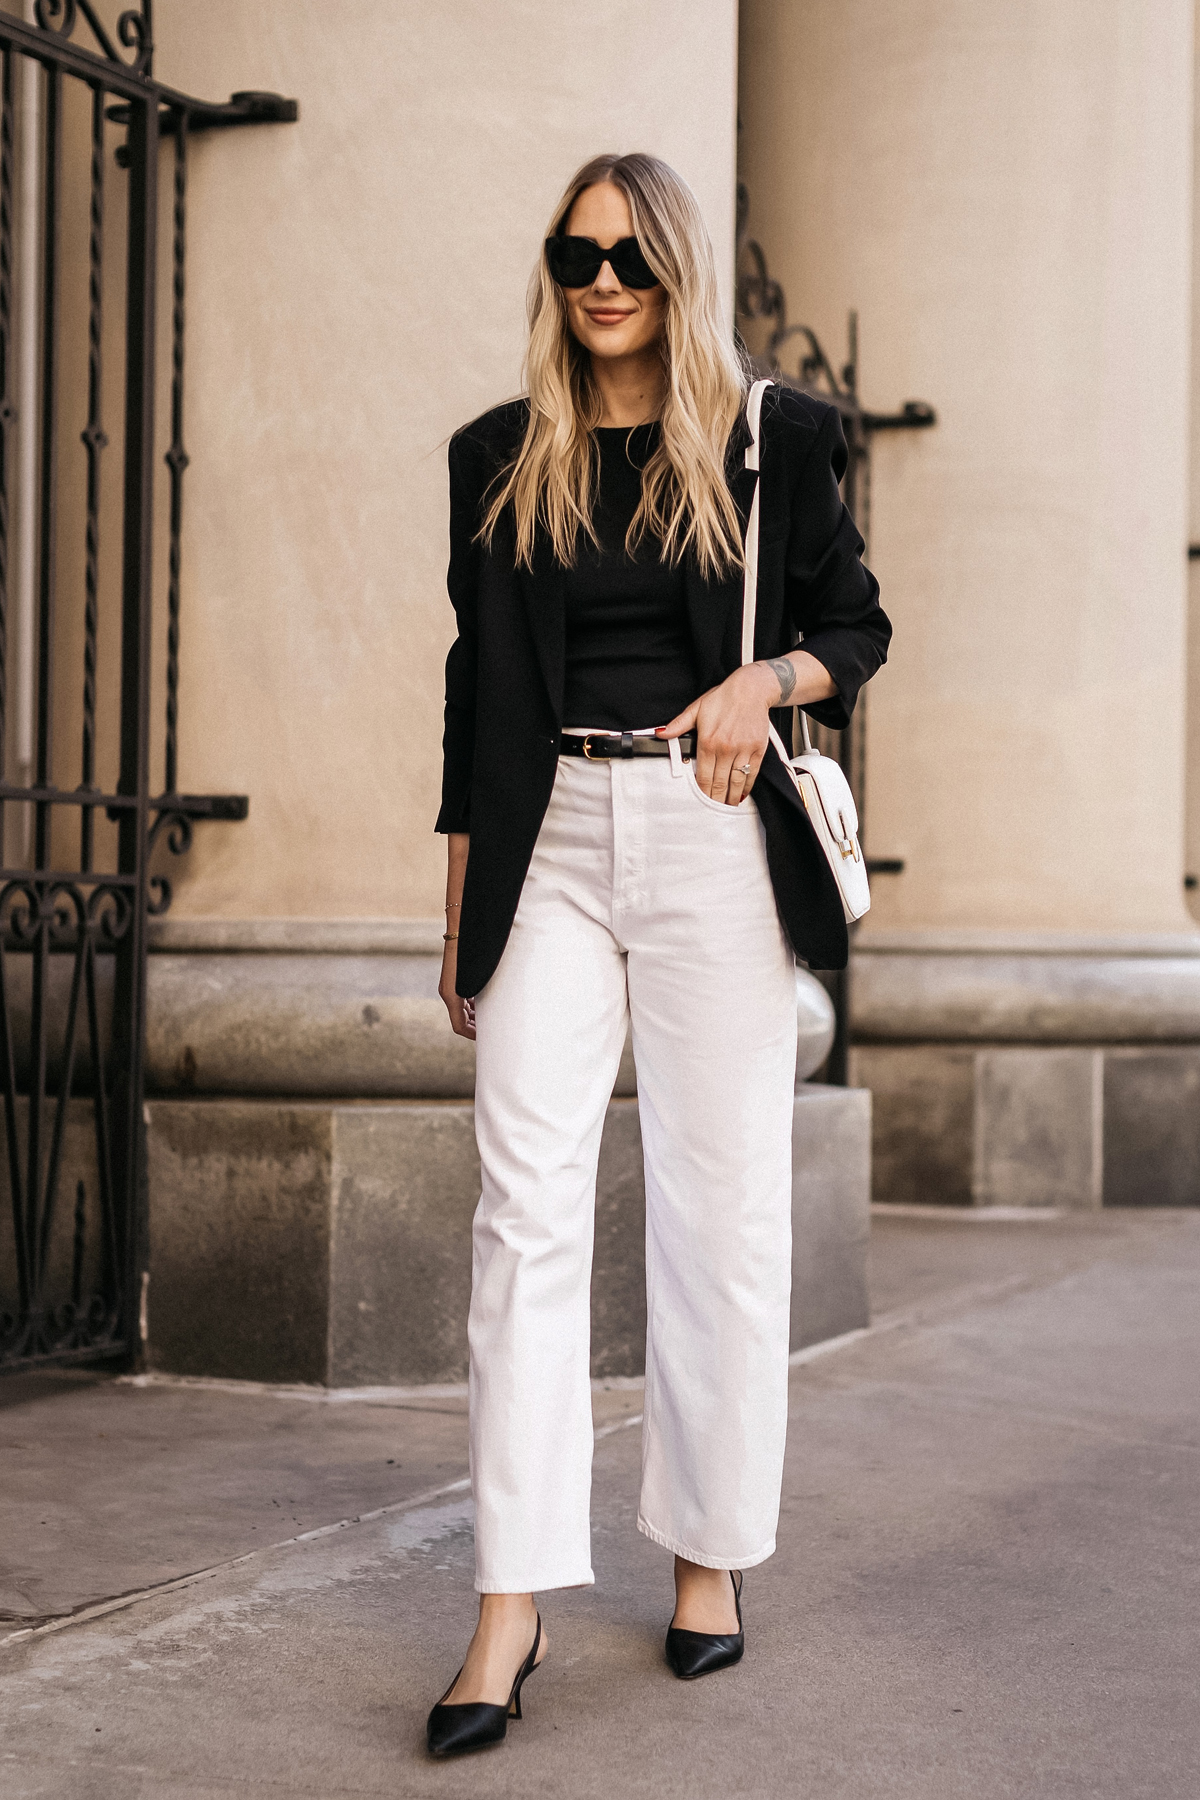 White Jeans  You Have Them, Now Let's Talk About How to Style Them